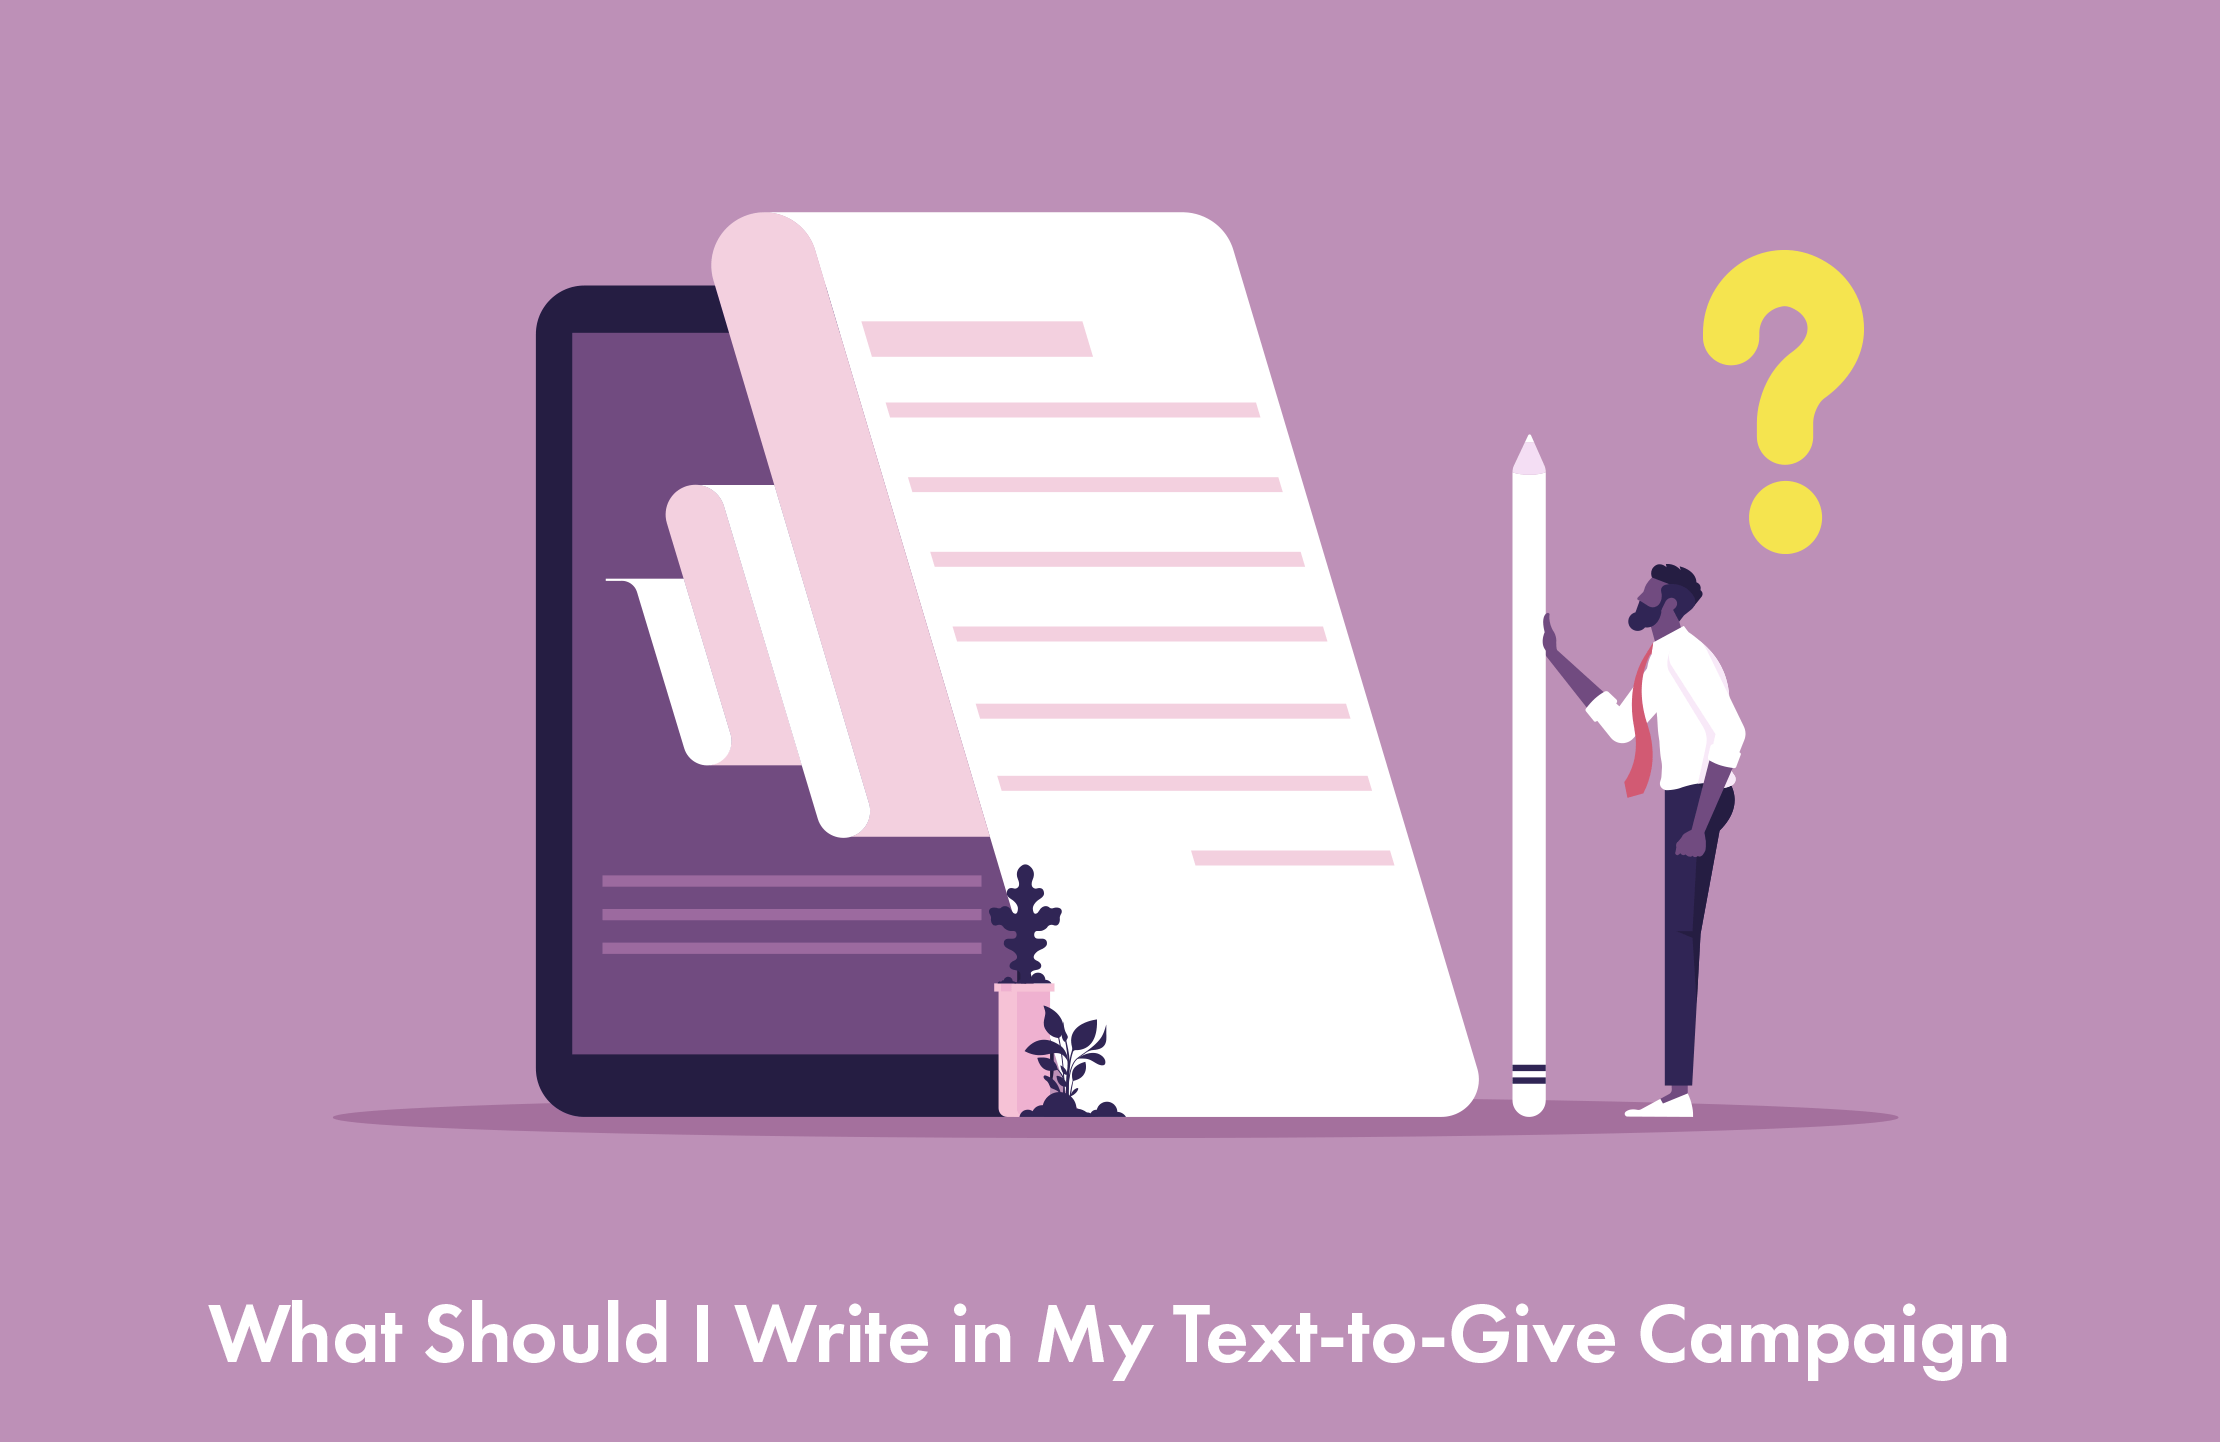 What Should I Write in My Text-to-Give Campaign?